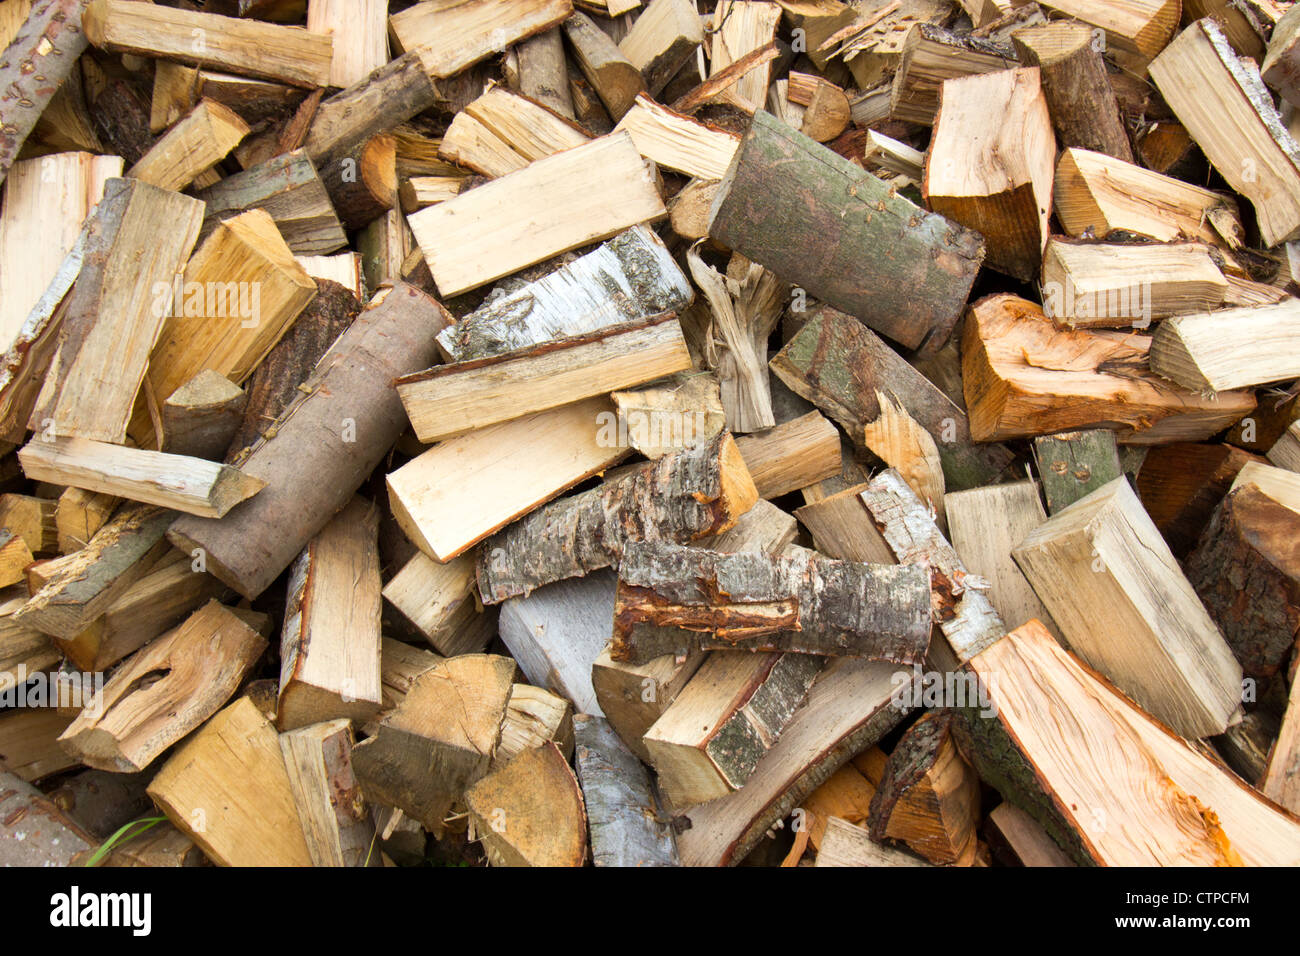 Pile of firewood Stock Photo